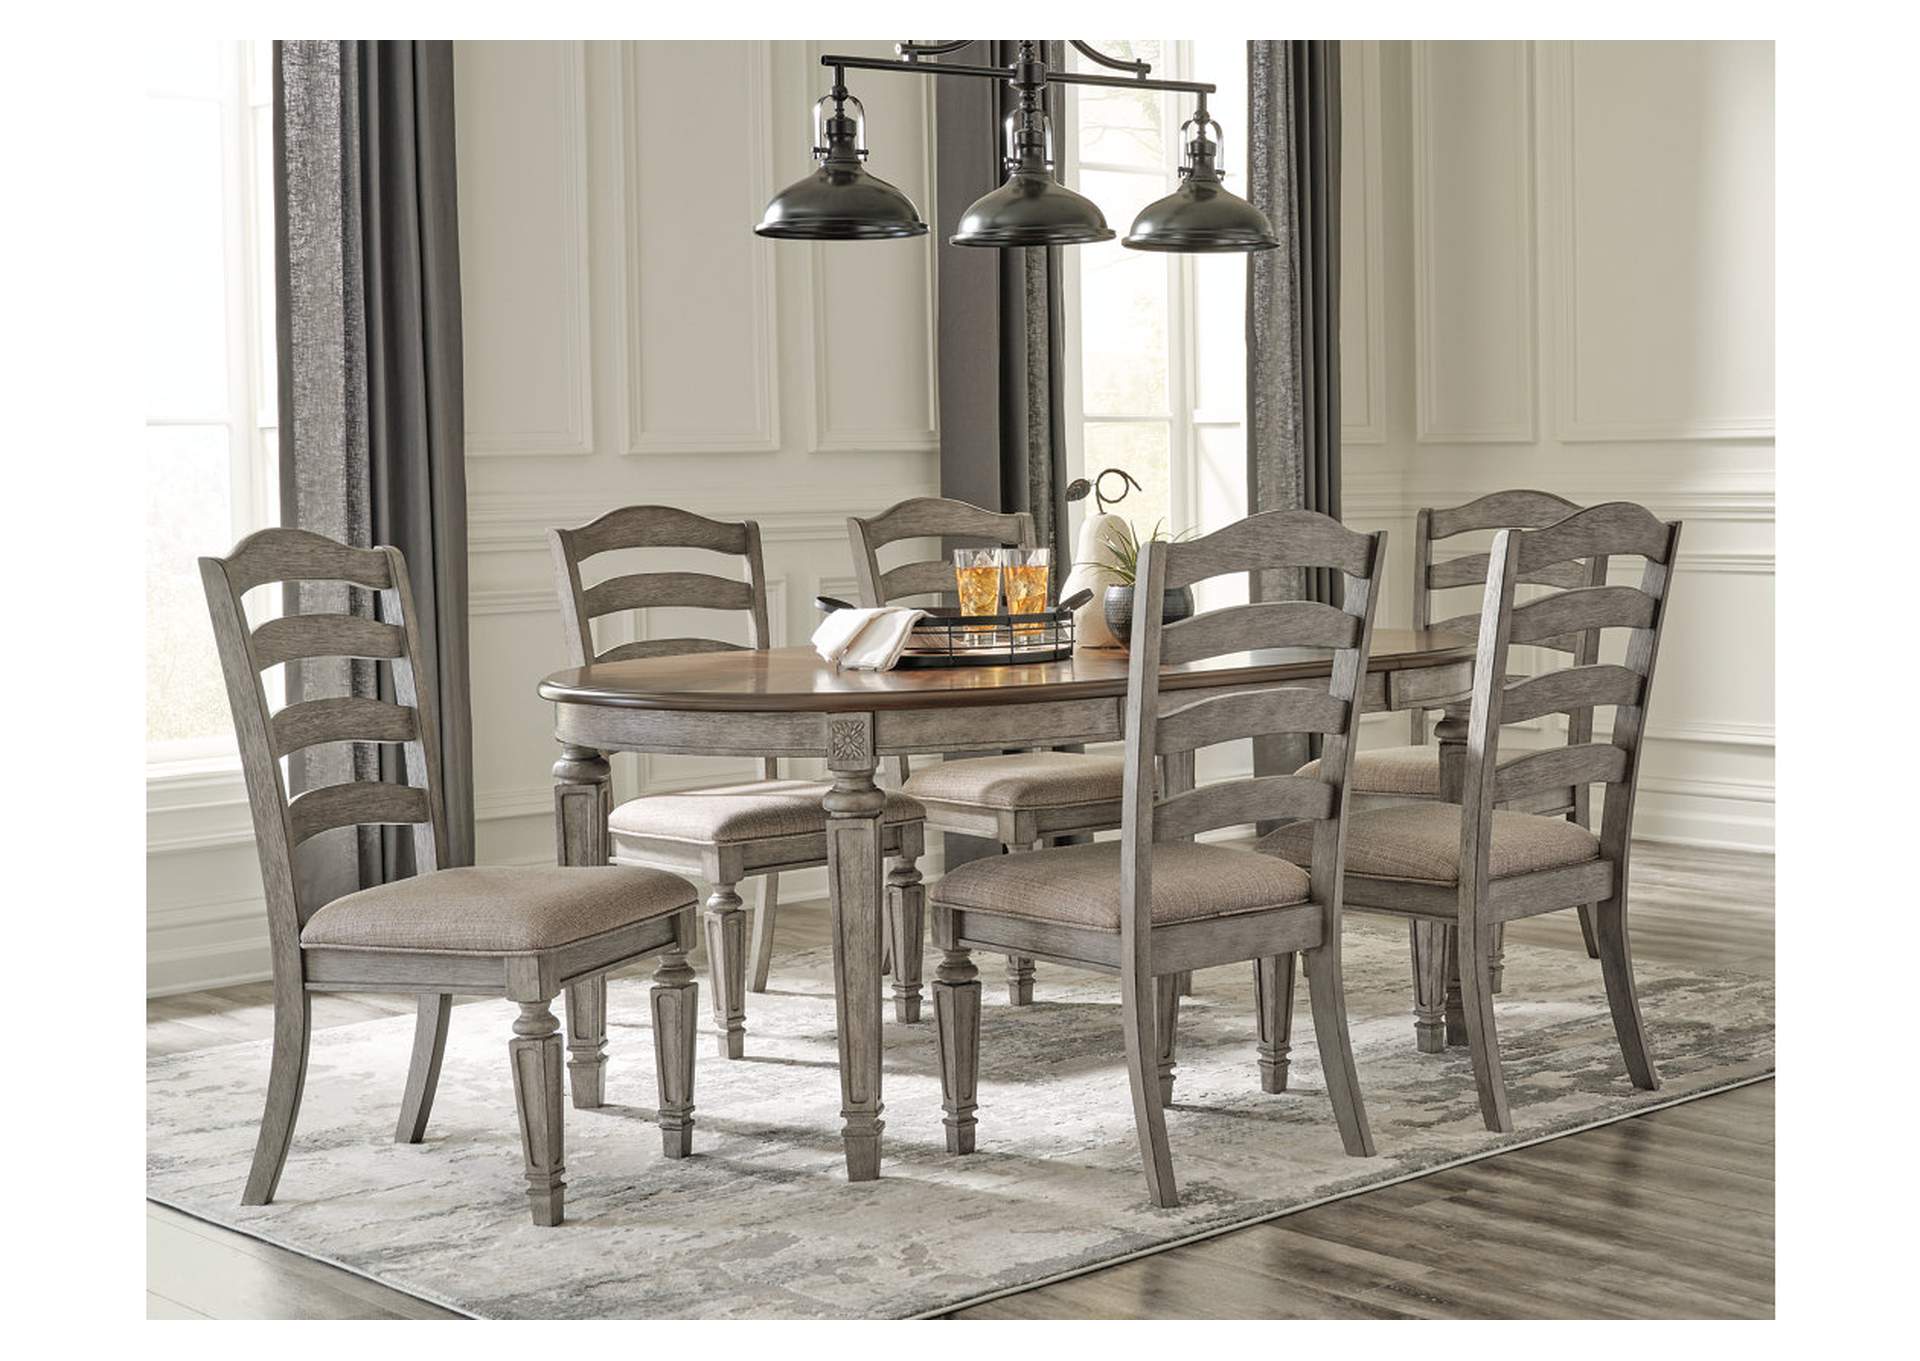 Lodenbay Dining Table and 6 Chairs,Signature Design By Ashley